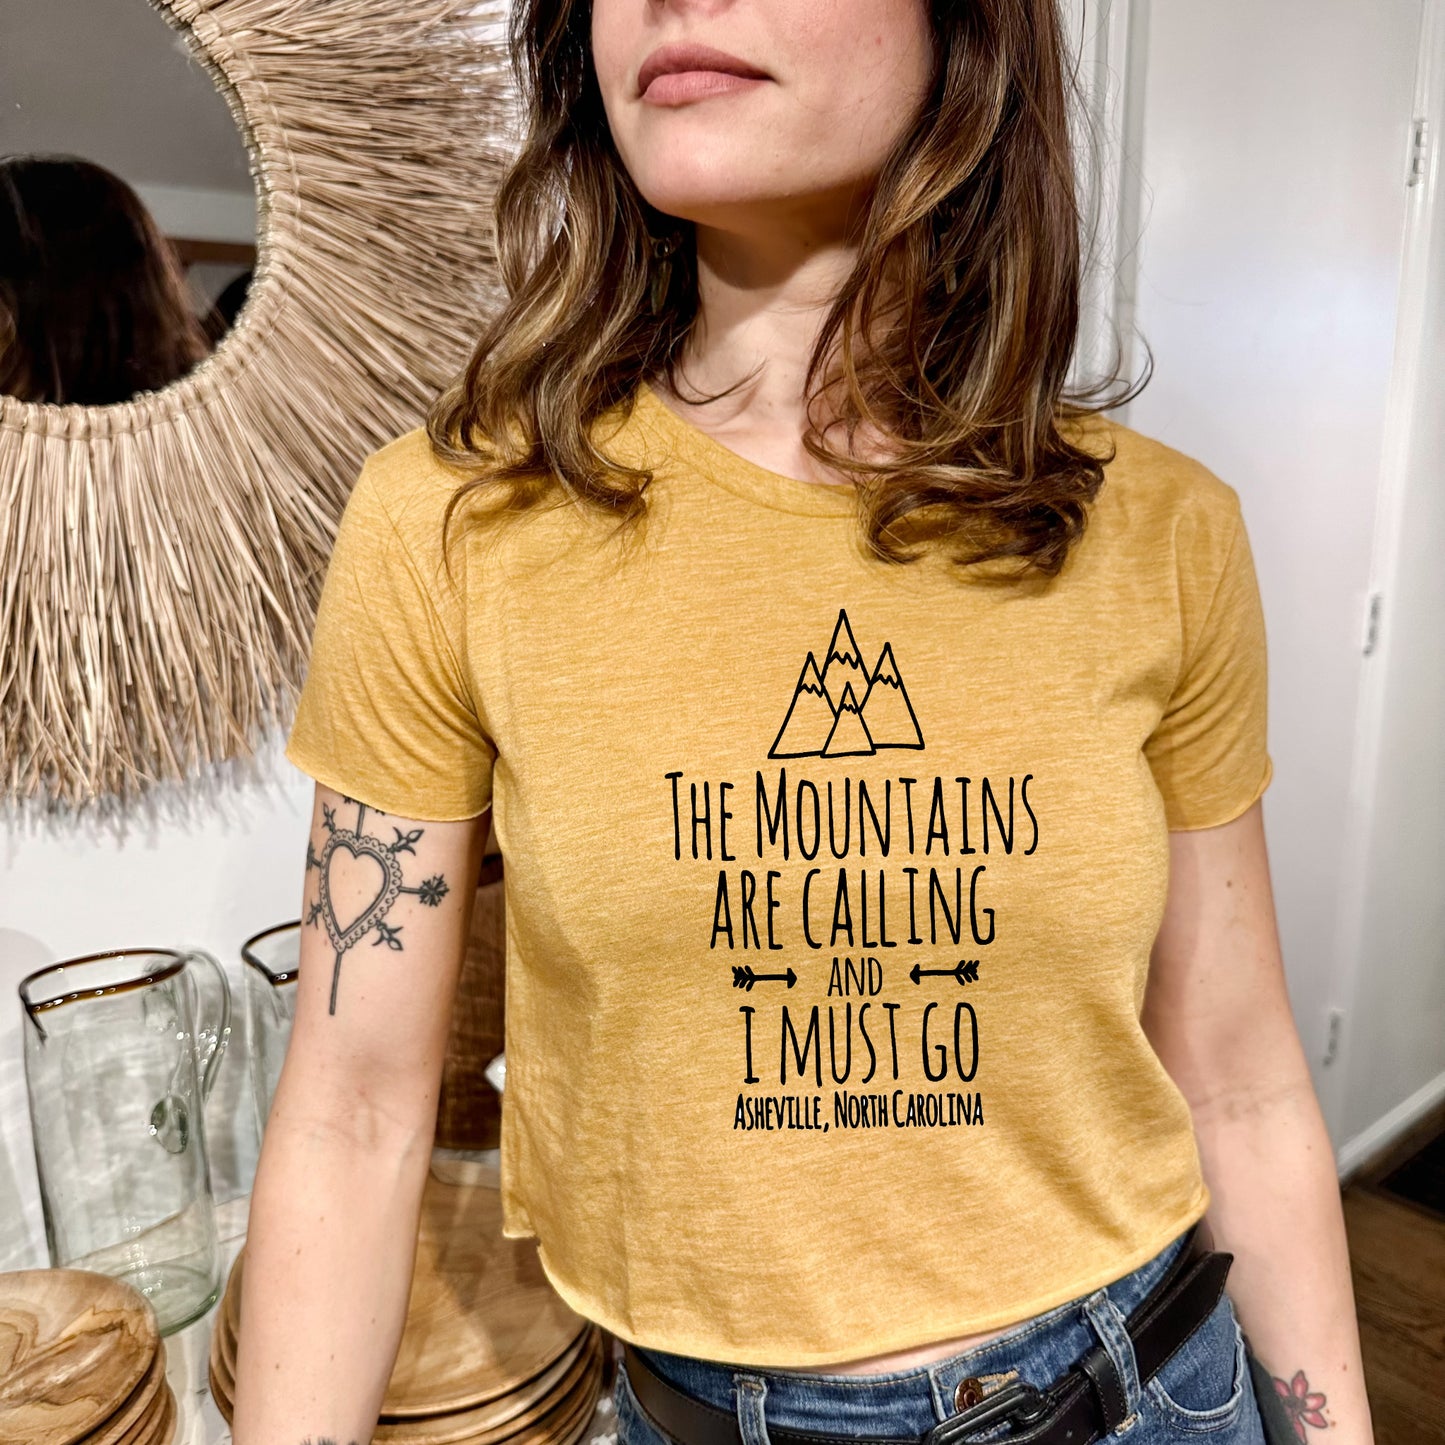 The Mountains Are Calling And I Must Go, Asheville North Carolina - Women's Crop Tee - Heather Gray or Gold